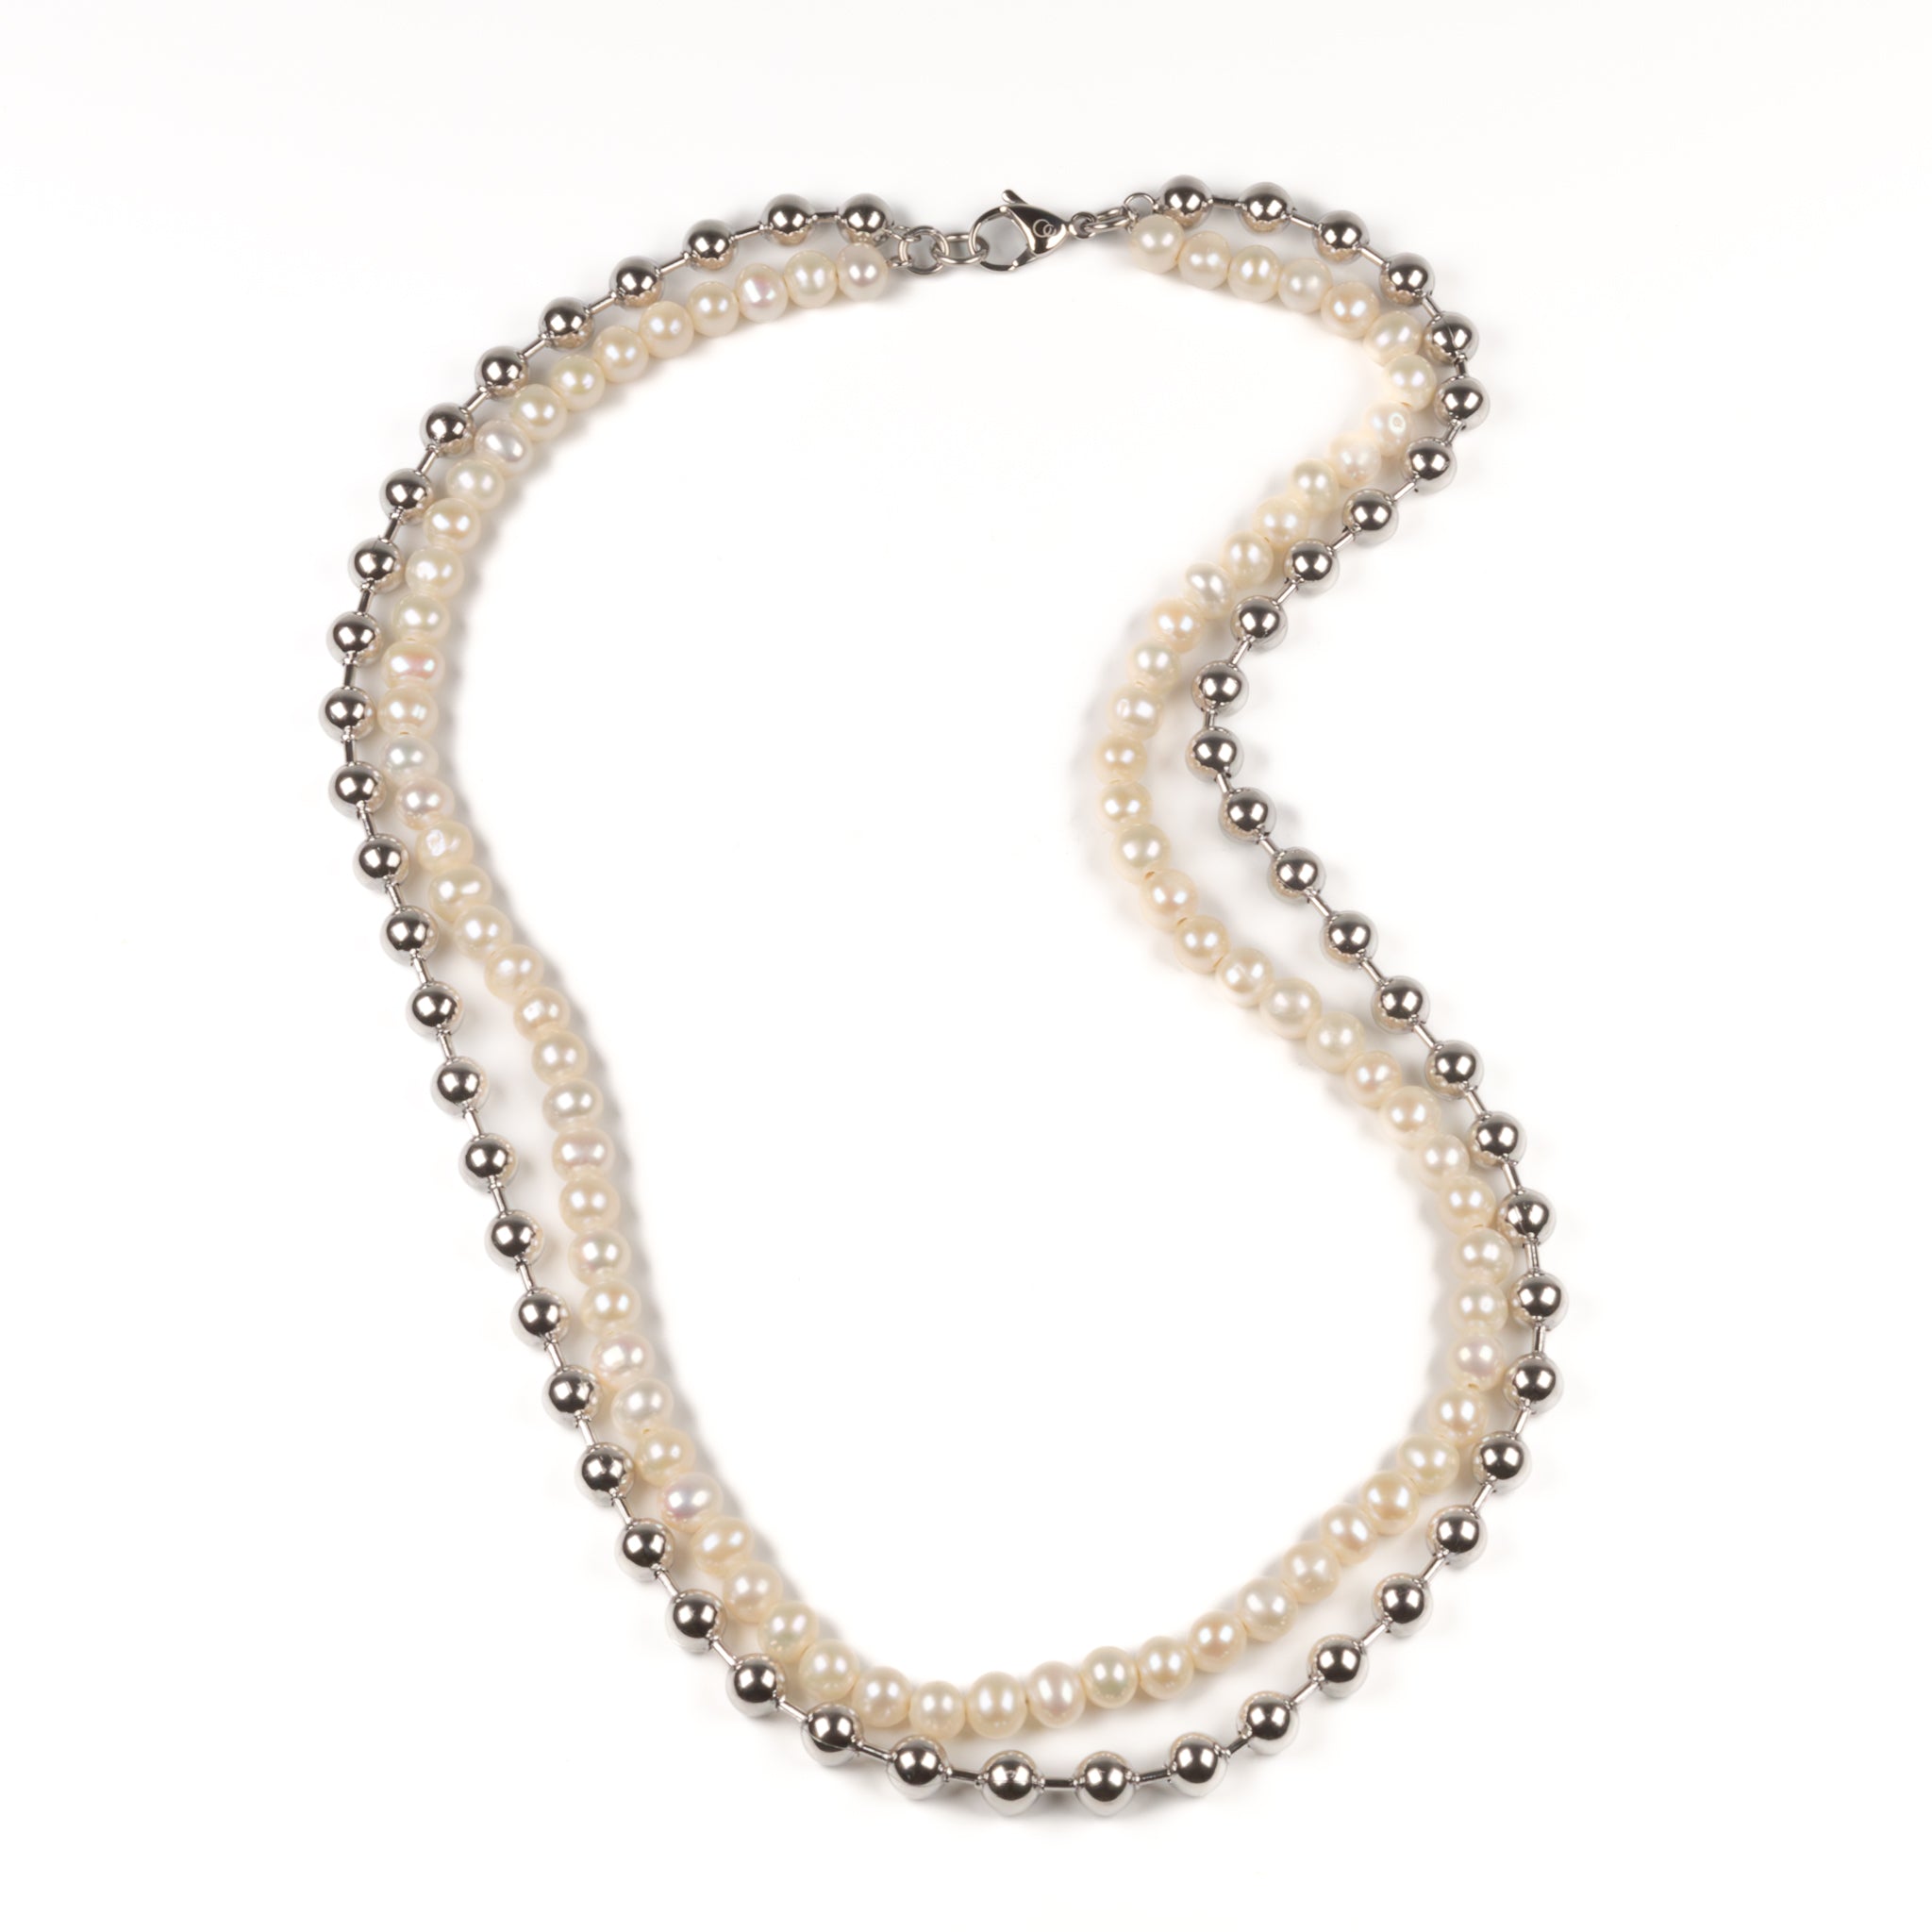 Stainless Steel and White Freshwater Pearl Double Ball Necklace